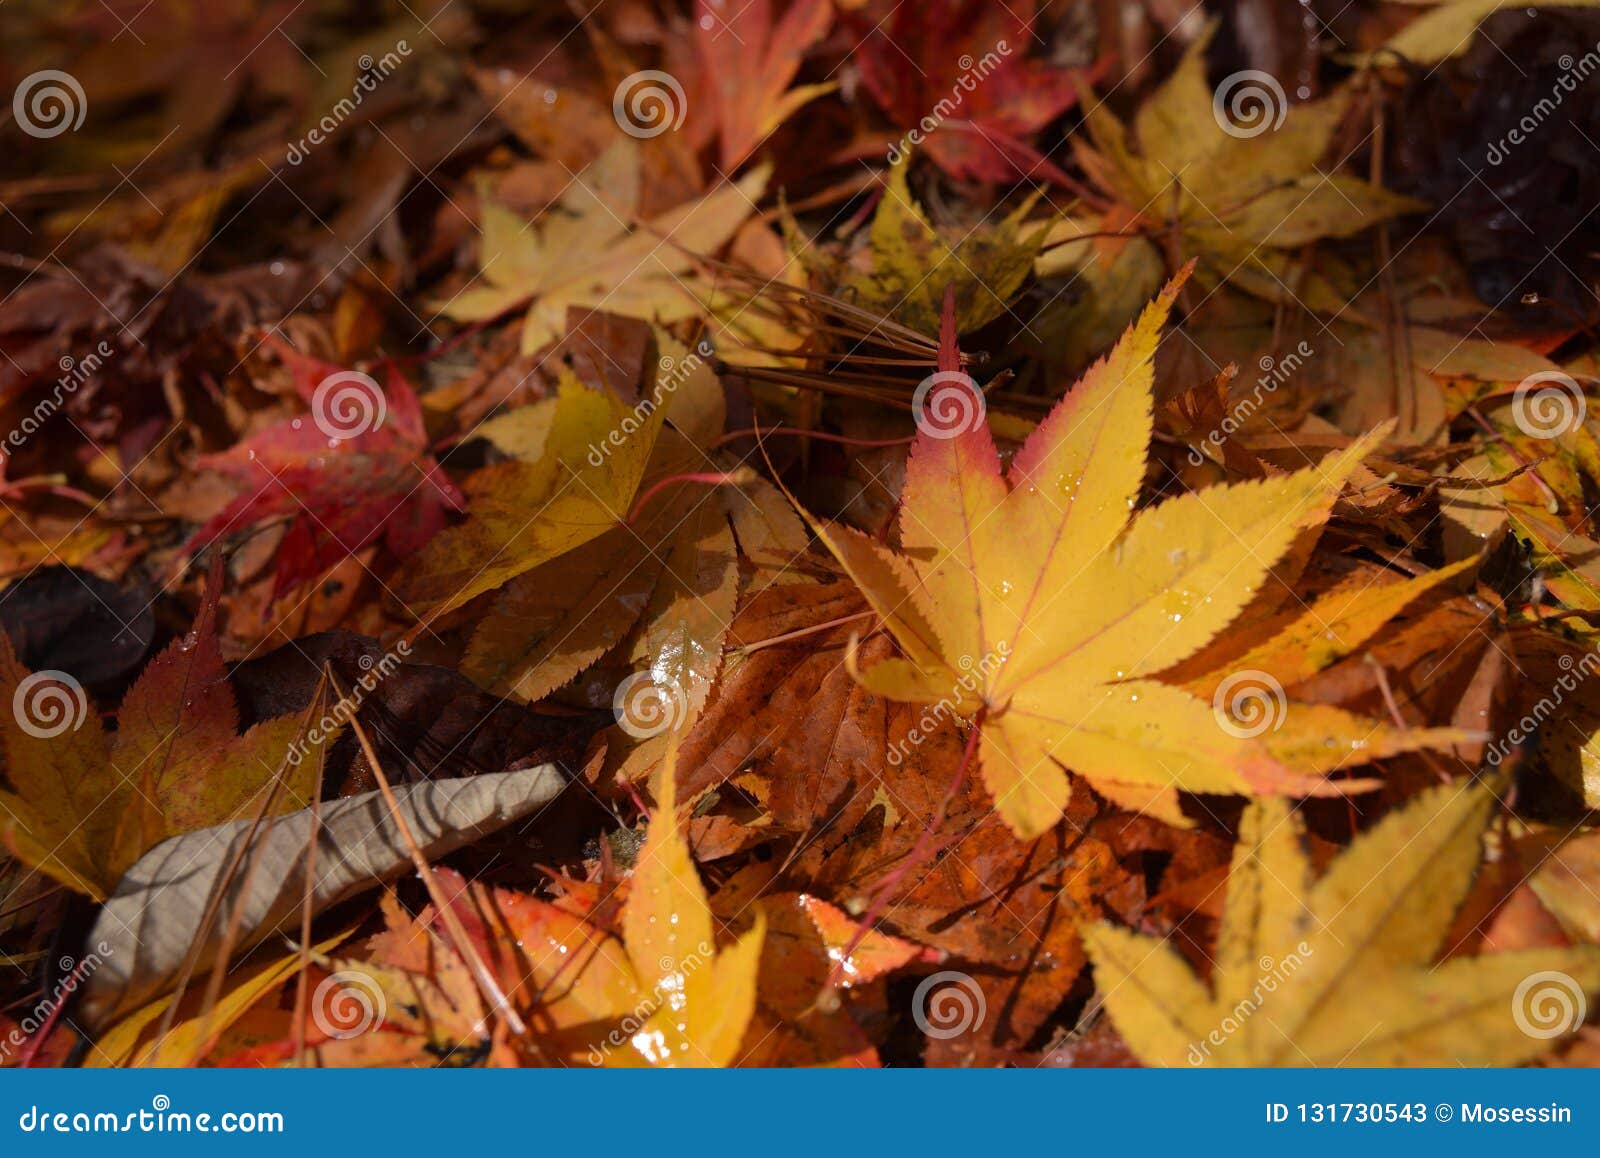 seven lobed maple leaf